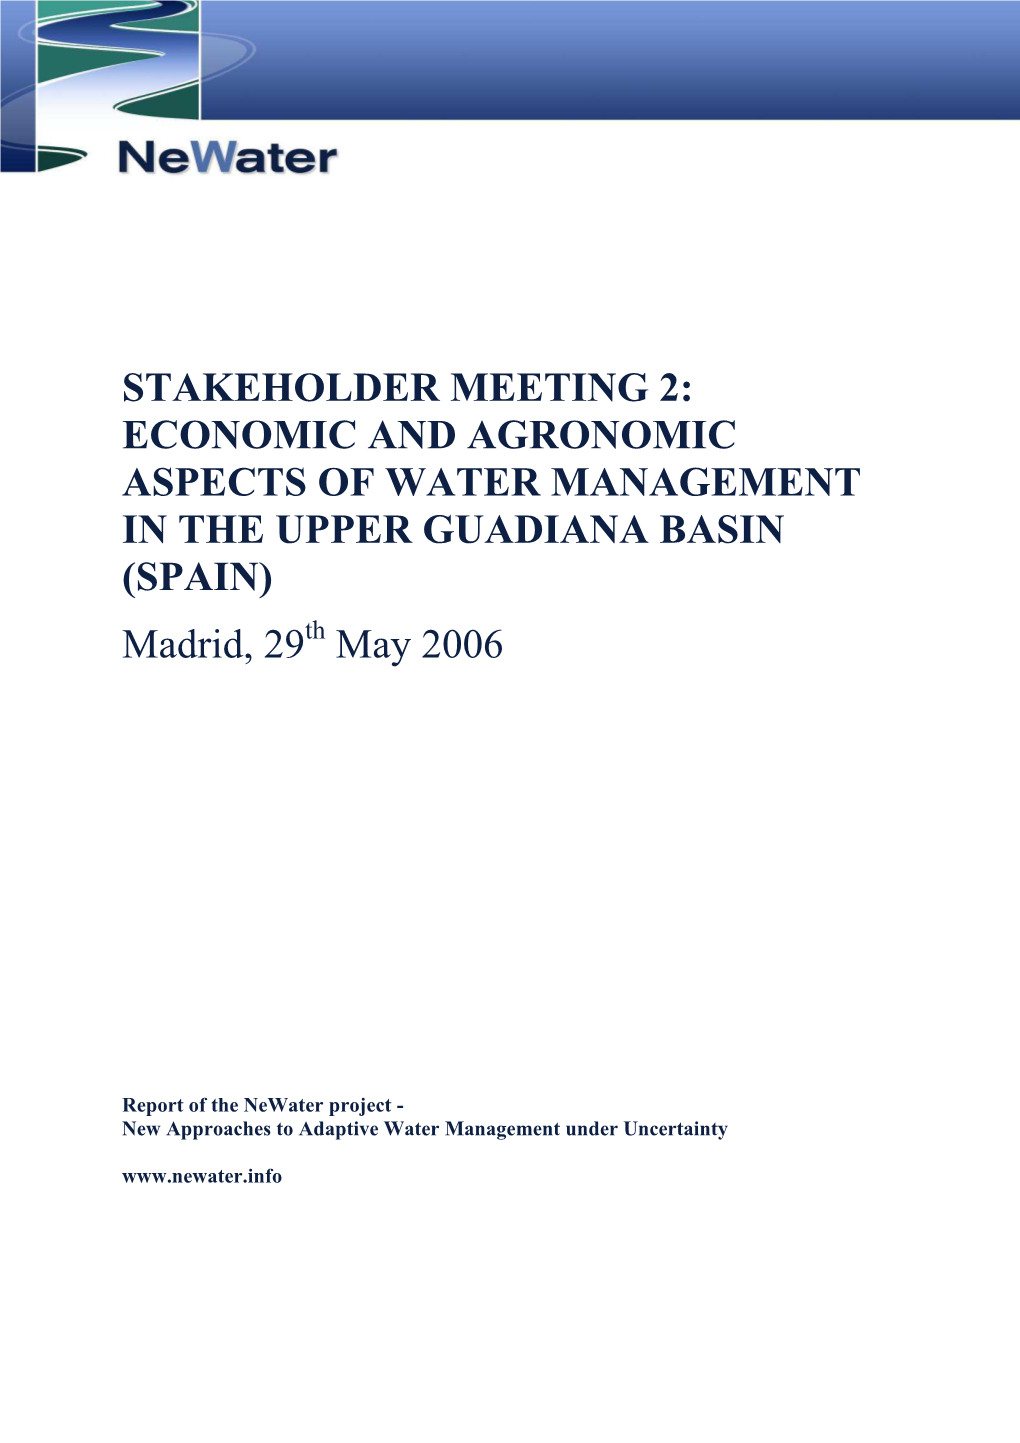 STAKEHOLDER MEETING 2: ECONOMIC and AGRONOMIC ASPECTS of WATER MANAGEMENT in the UPPER GUADIANA BASIN (SPAIN) Madrid, 29 Th May 2006